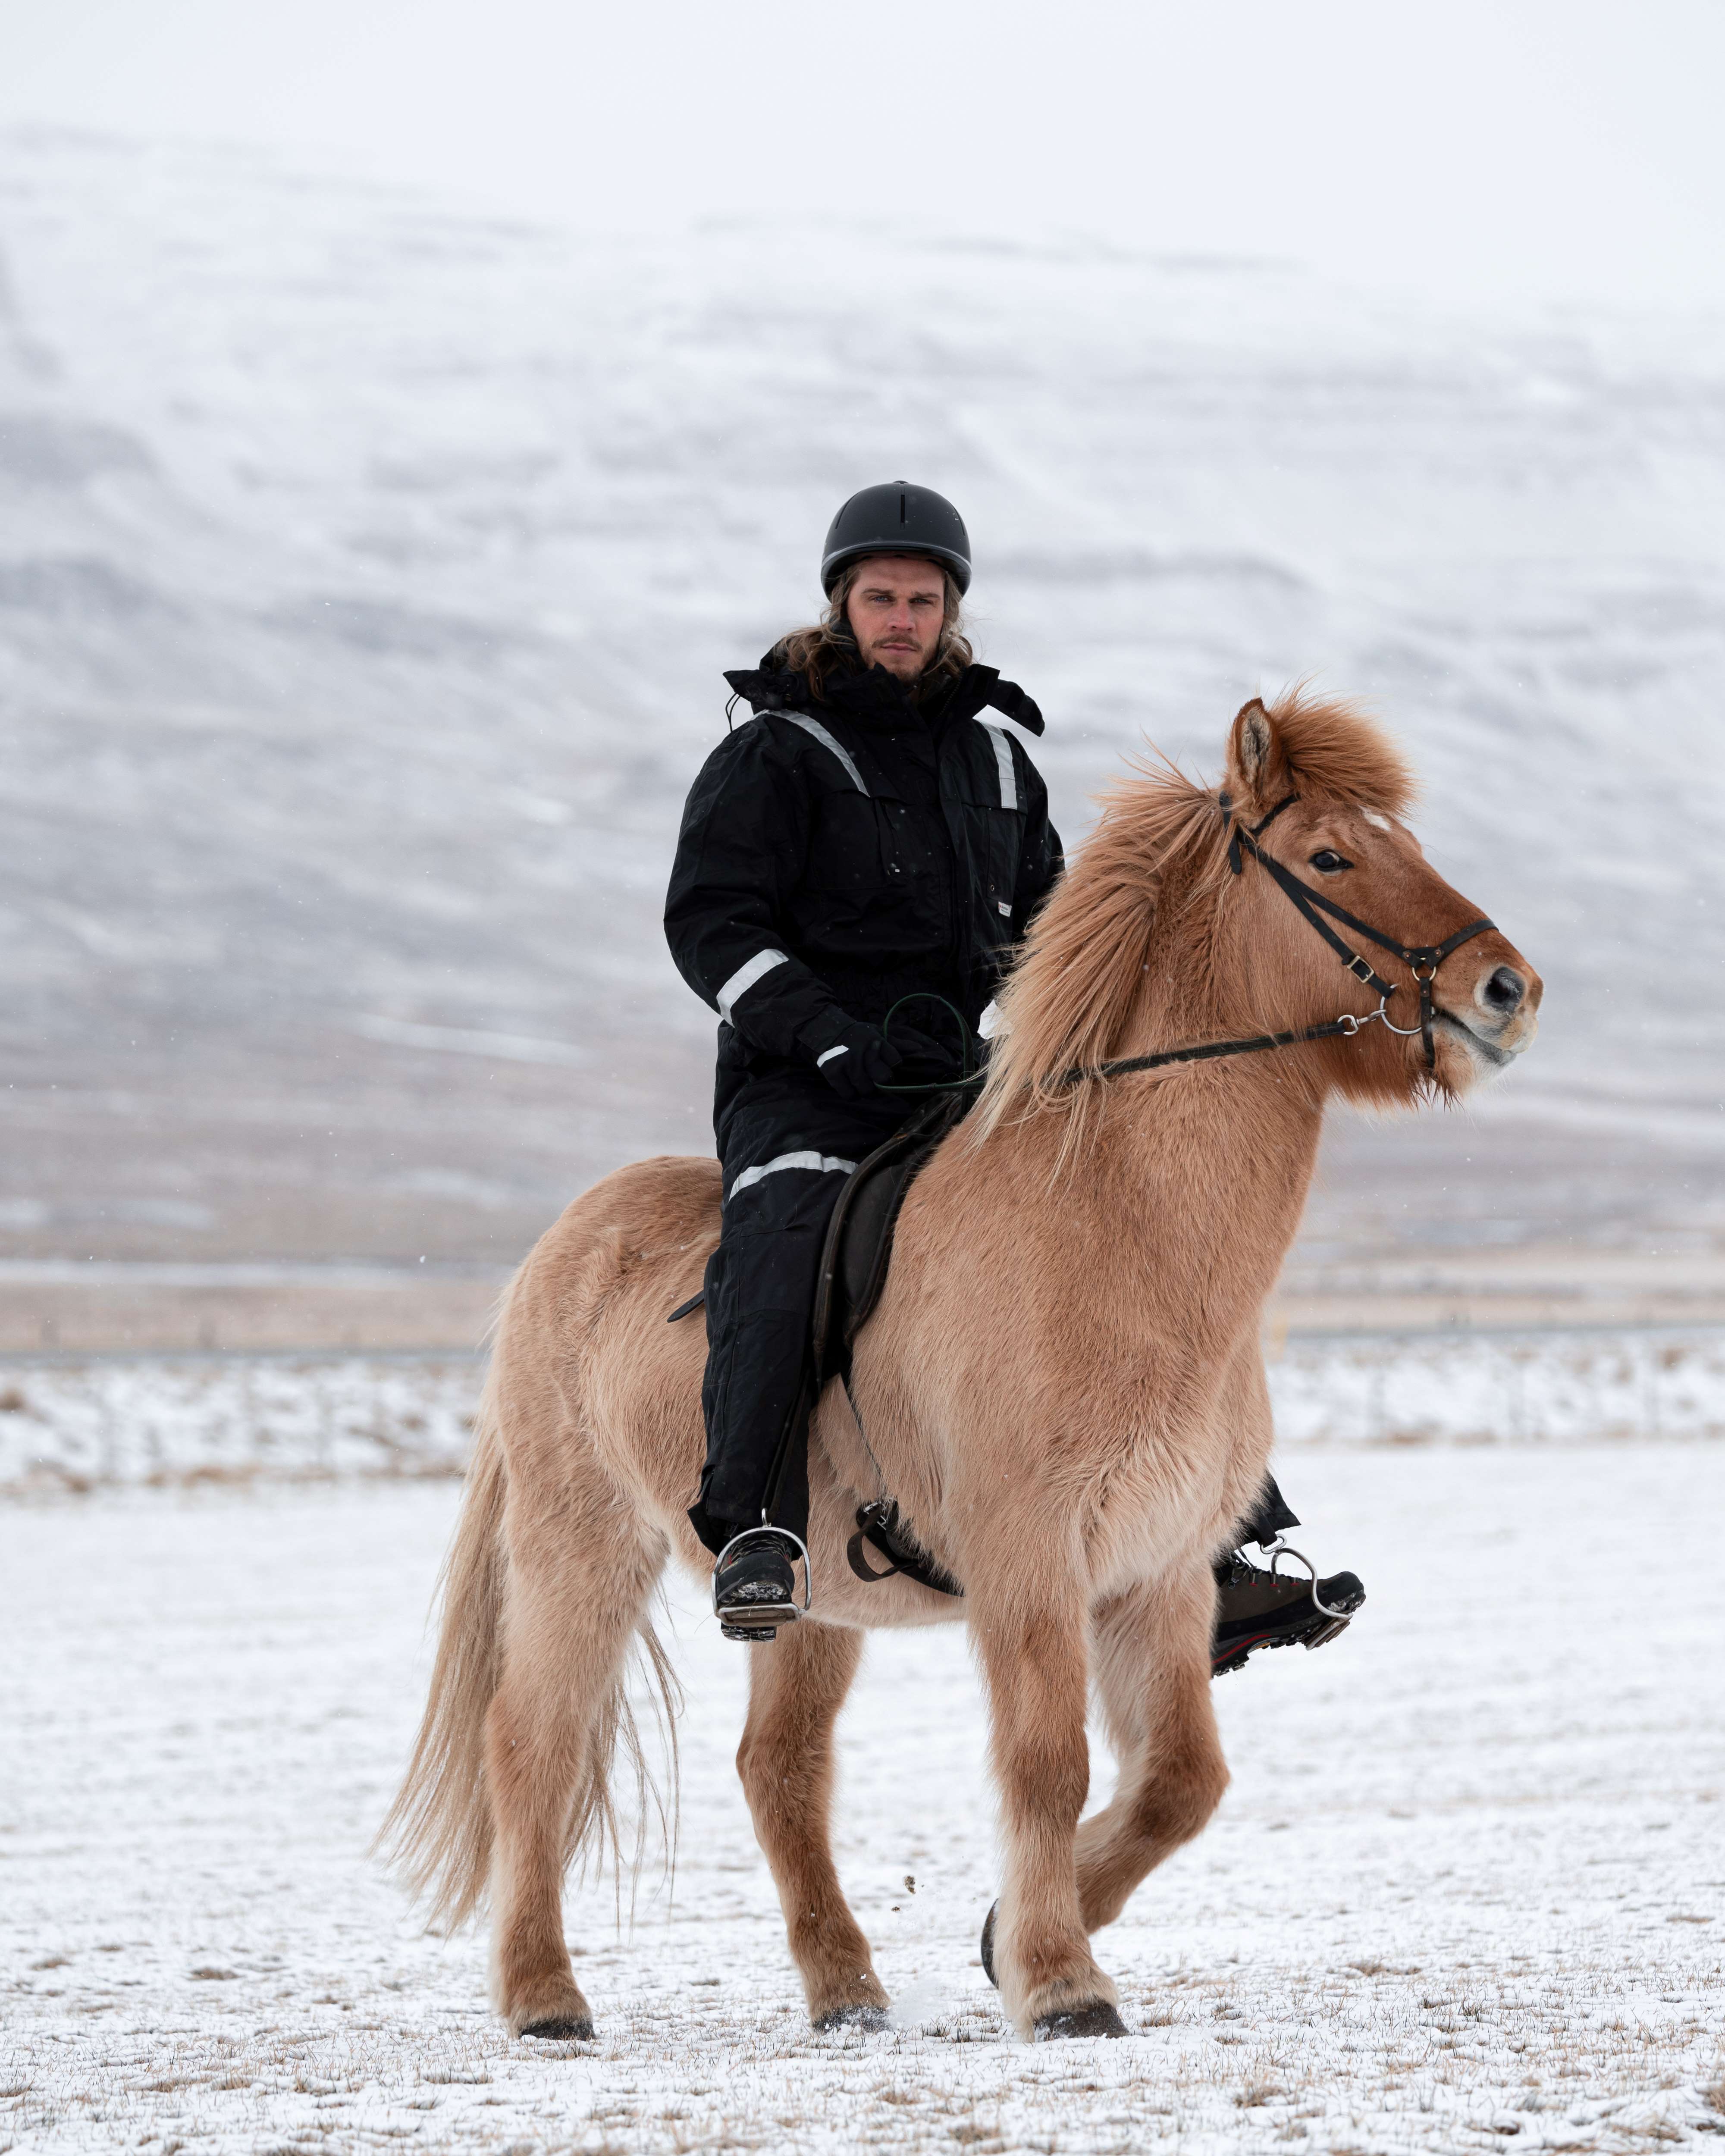 Rúrik Gíslason sits astride a sand-colored Icelandic horse, with moiuntains in the background.